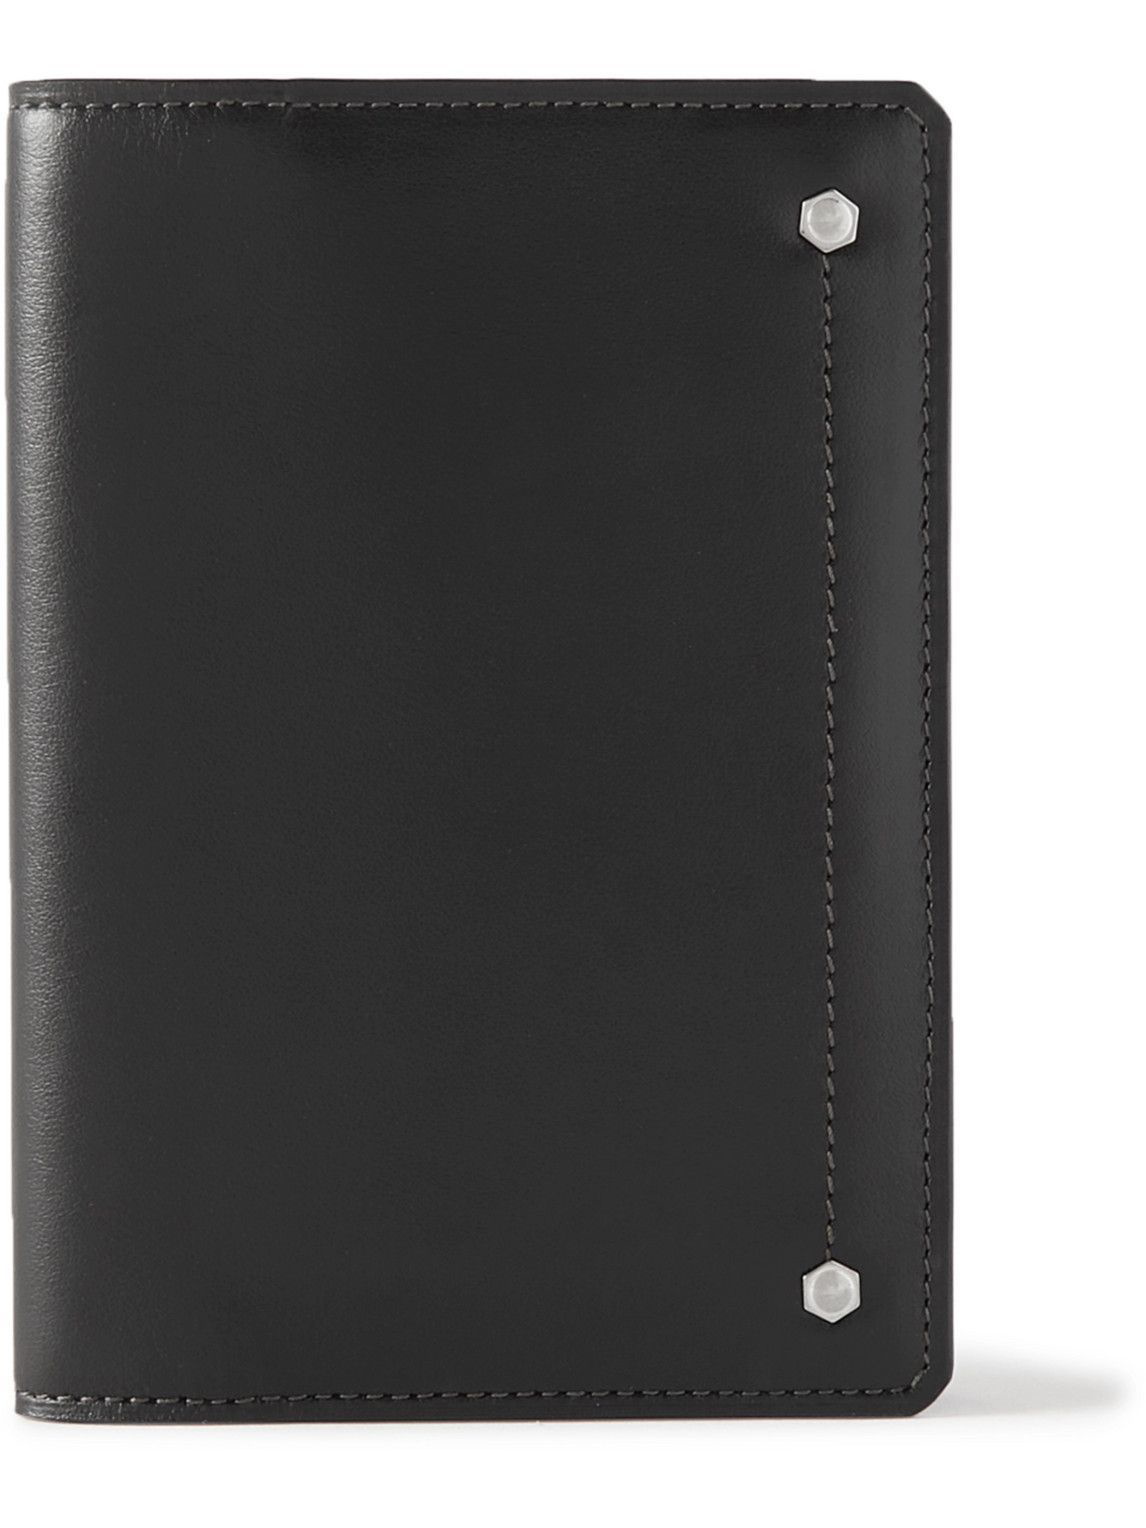 Connolly - 007 Hex Leather Passport Cover Connolly